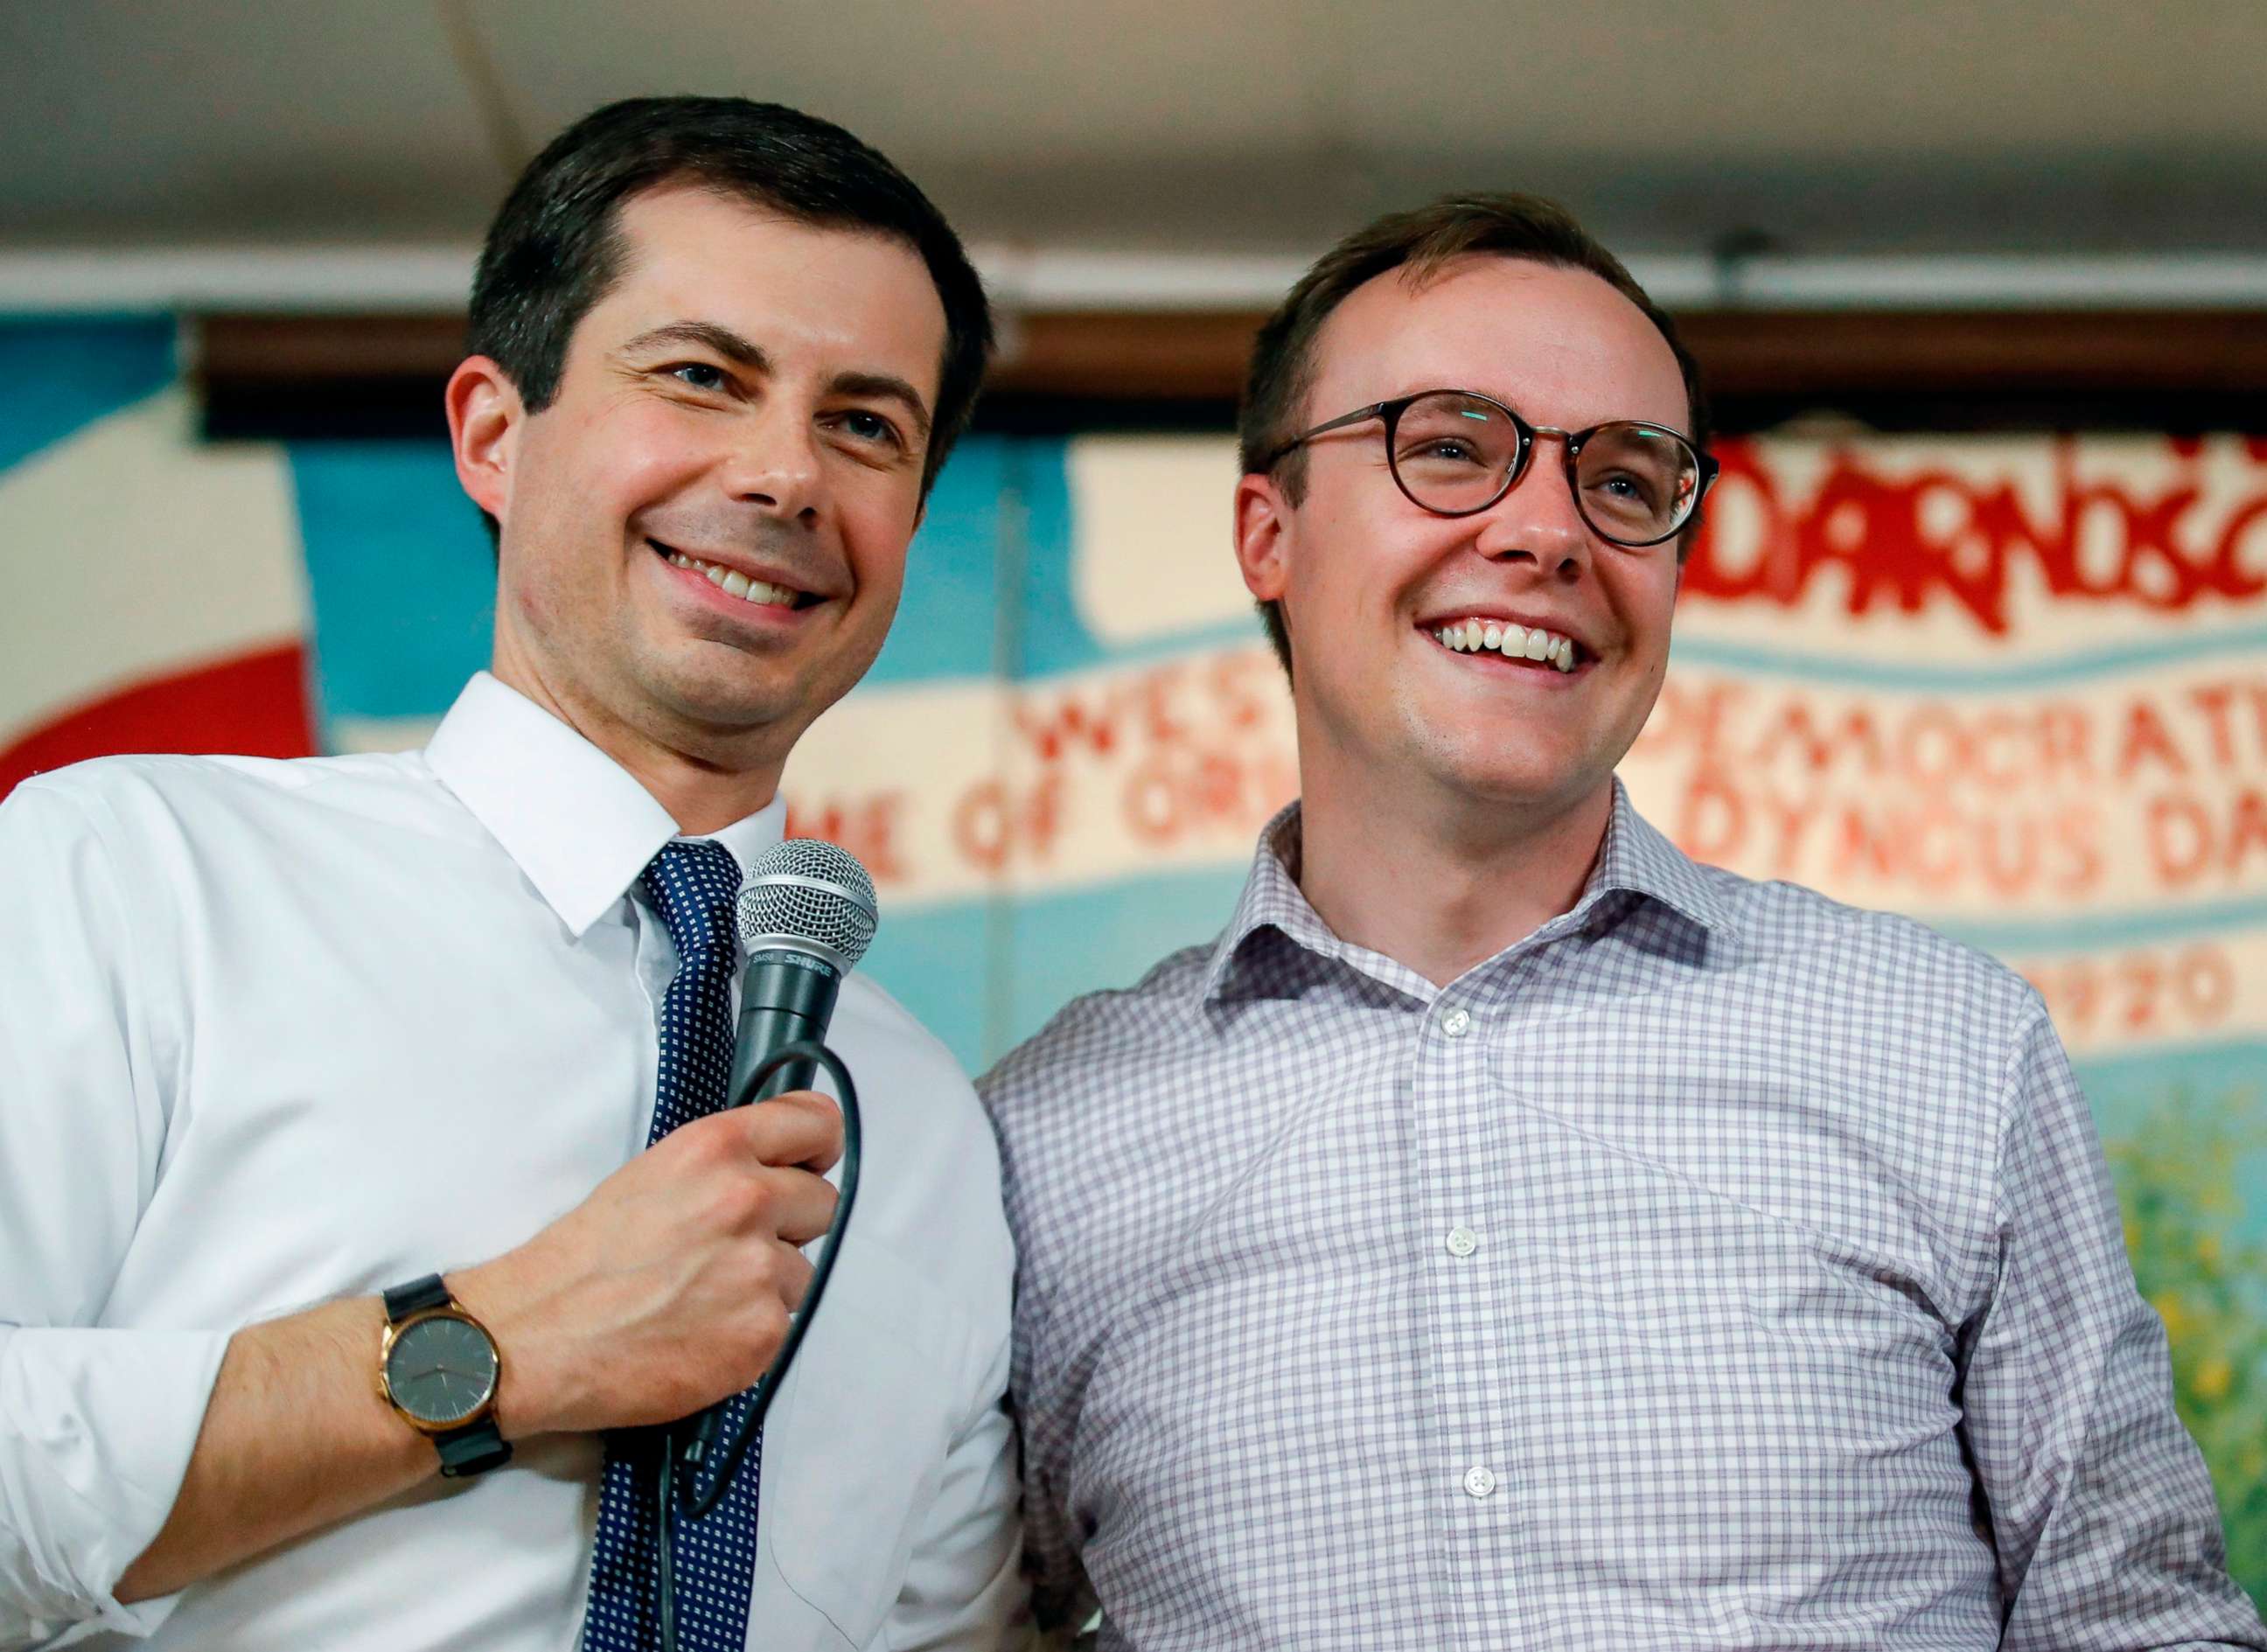 PHOTO: In this file photo taken on April 22, 2019, South Bend Mayor and Democratic presidential candidate Pete Buttigieg speaks besides husband Chasten Glezman at the West Side Democratic Club during a Dyngus Day celebration event in South Bend, Indiana.